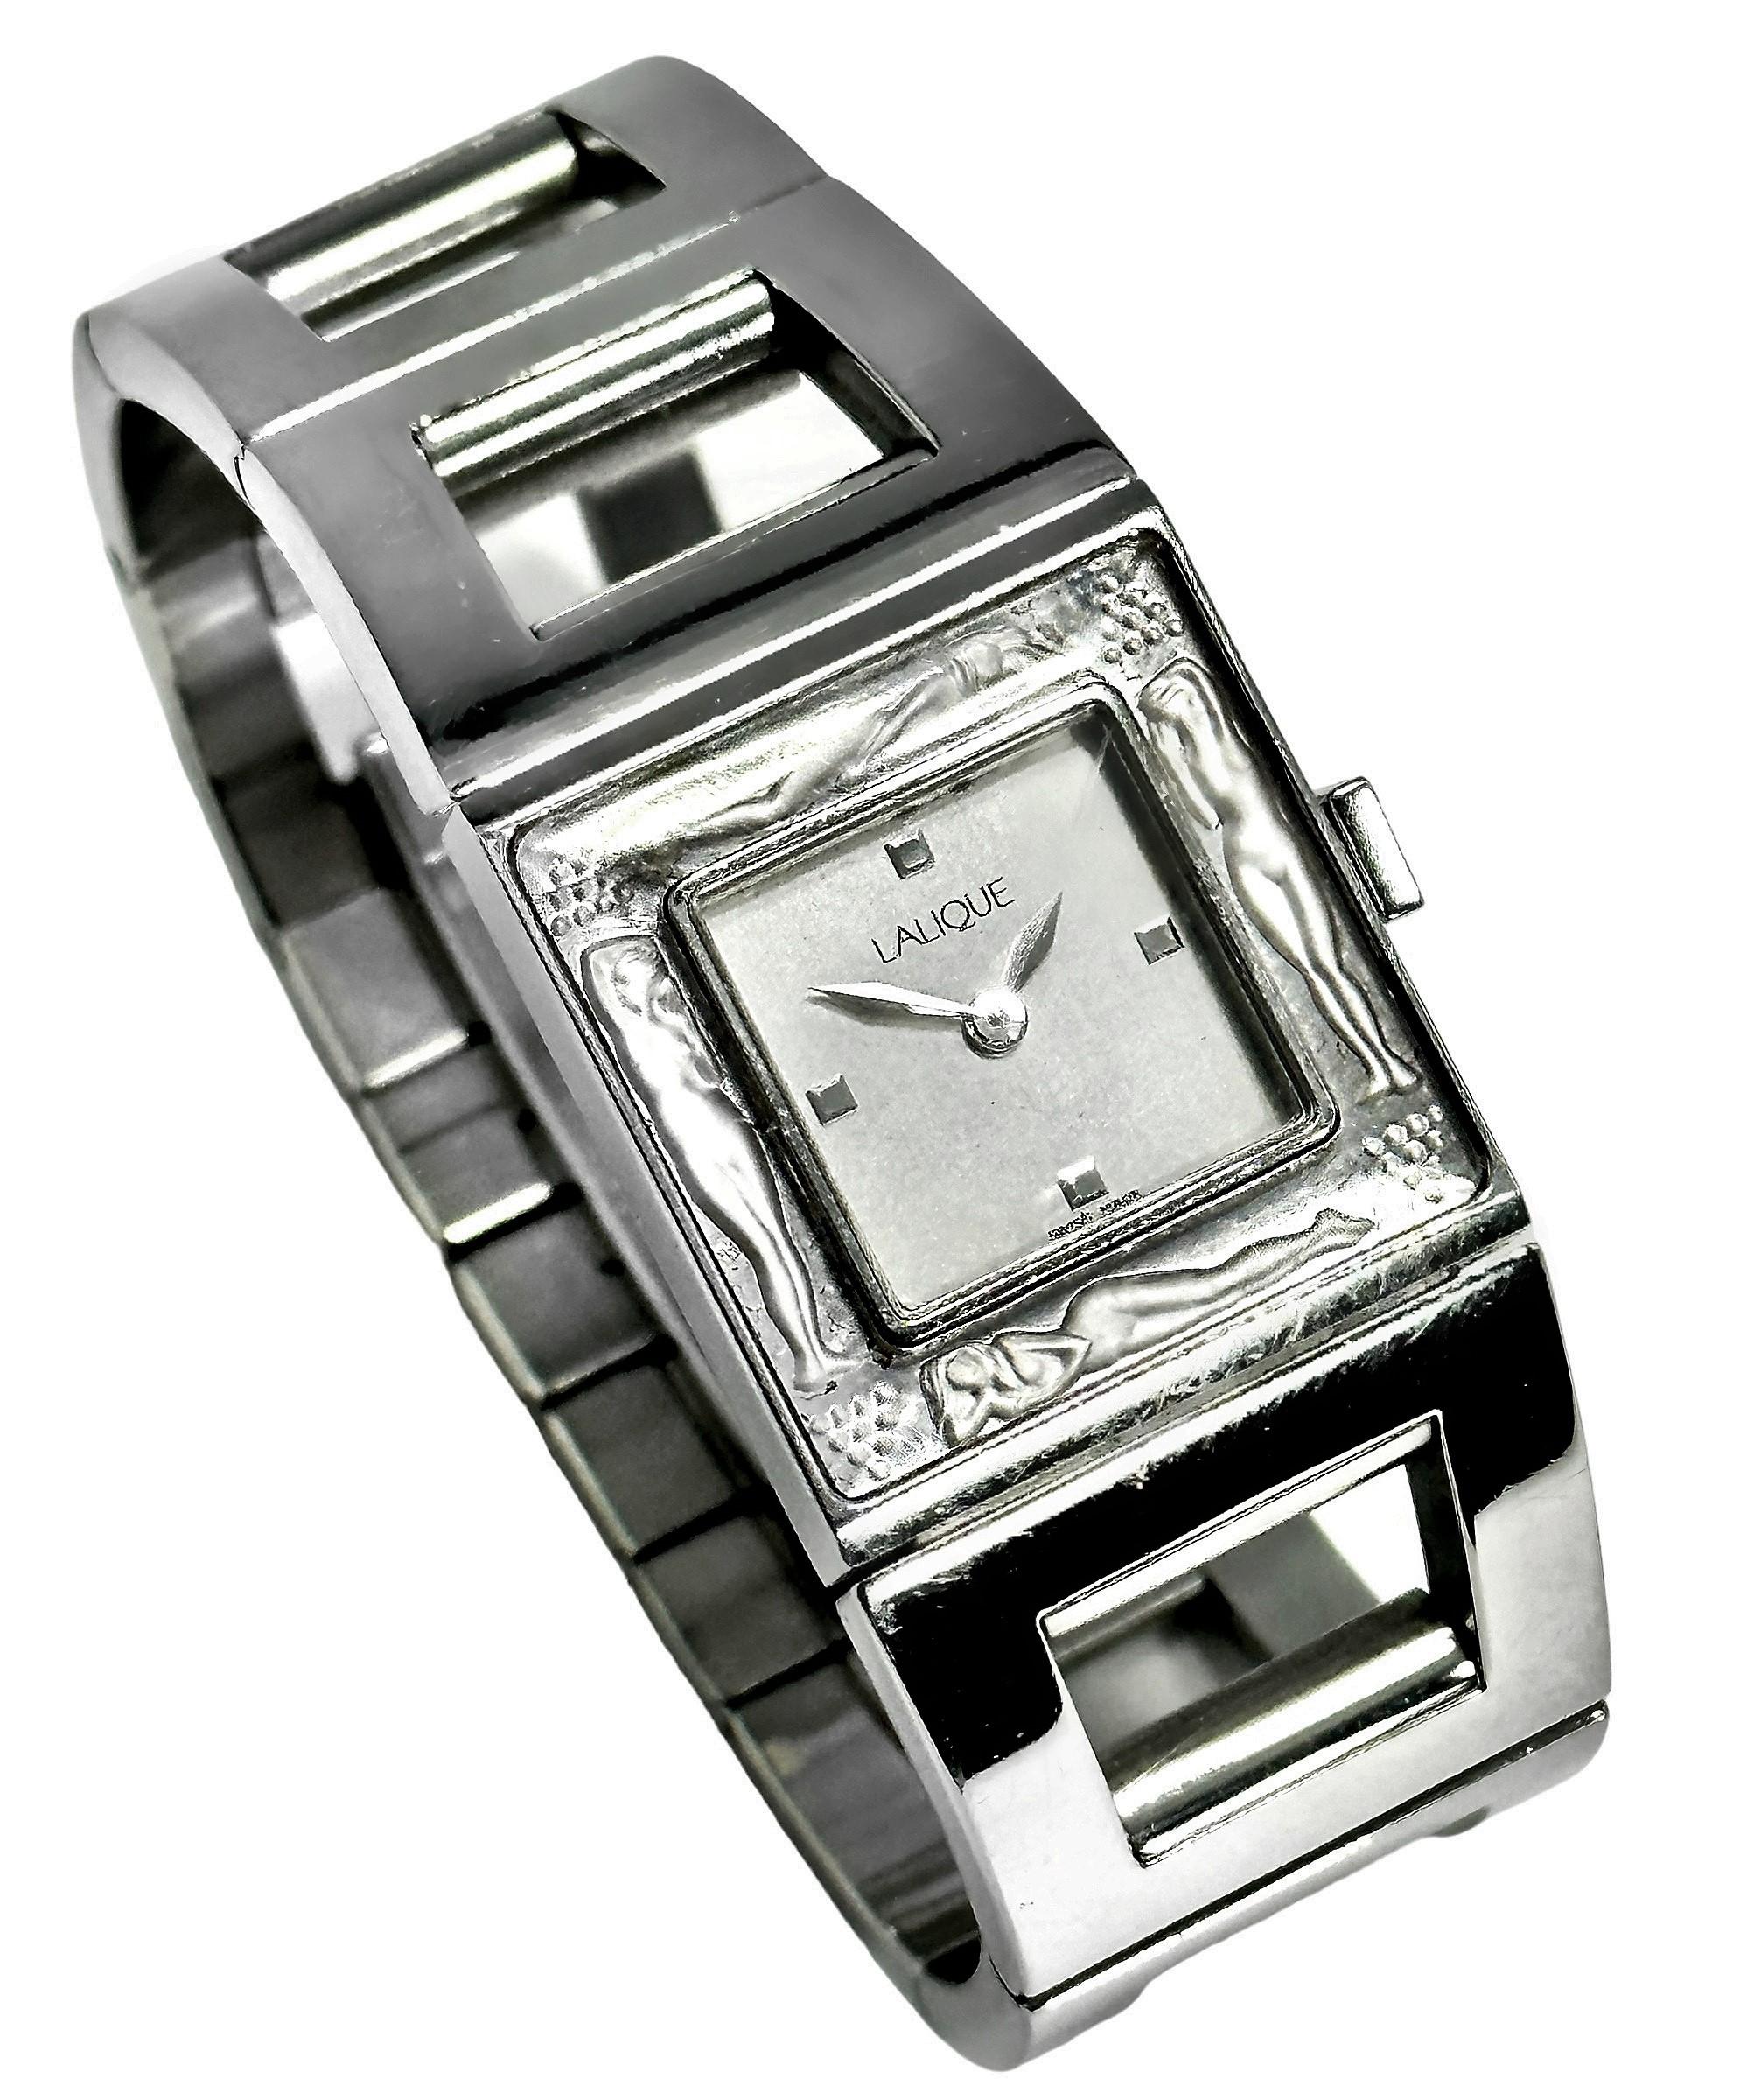 A stainless-steel ladies watch, with a case measuring 24mm wide. The bracelet features a square open link, which tapers from 24mm to 21mm at its double-deployment buckle. The bezel features four feminine bodies and four motifs carved in crystal. The